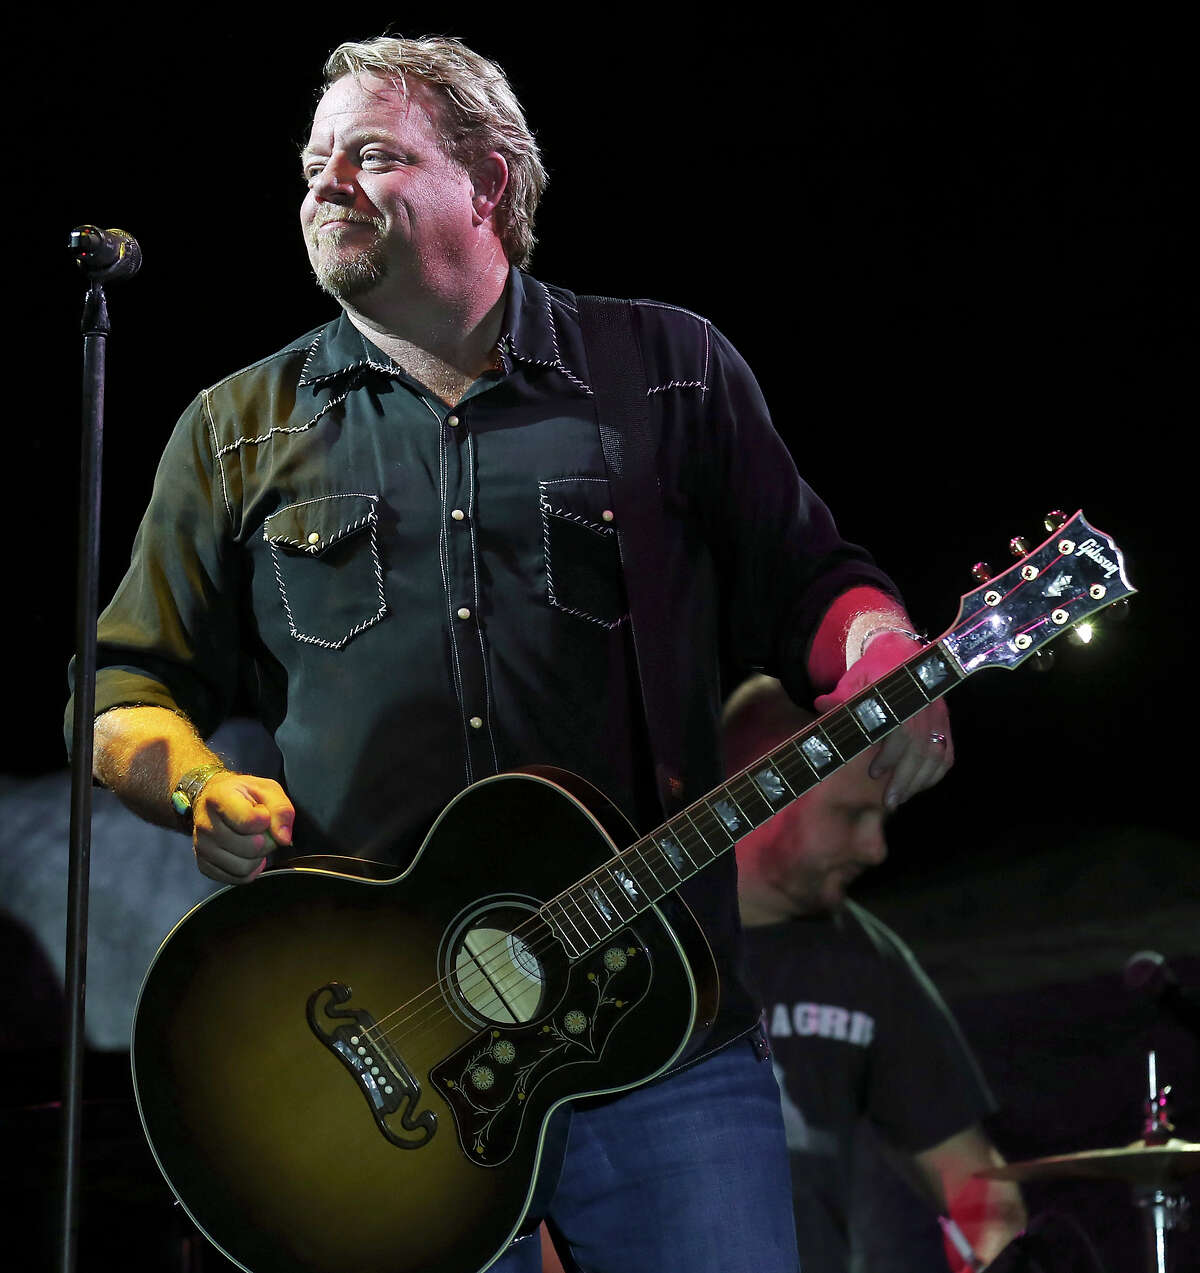 Pat Green will take the stage Saturday at 10 p.m.